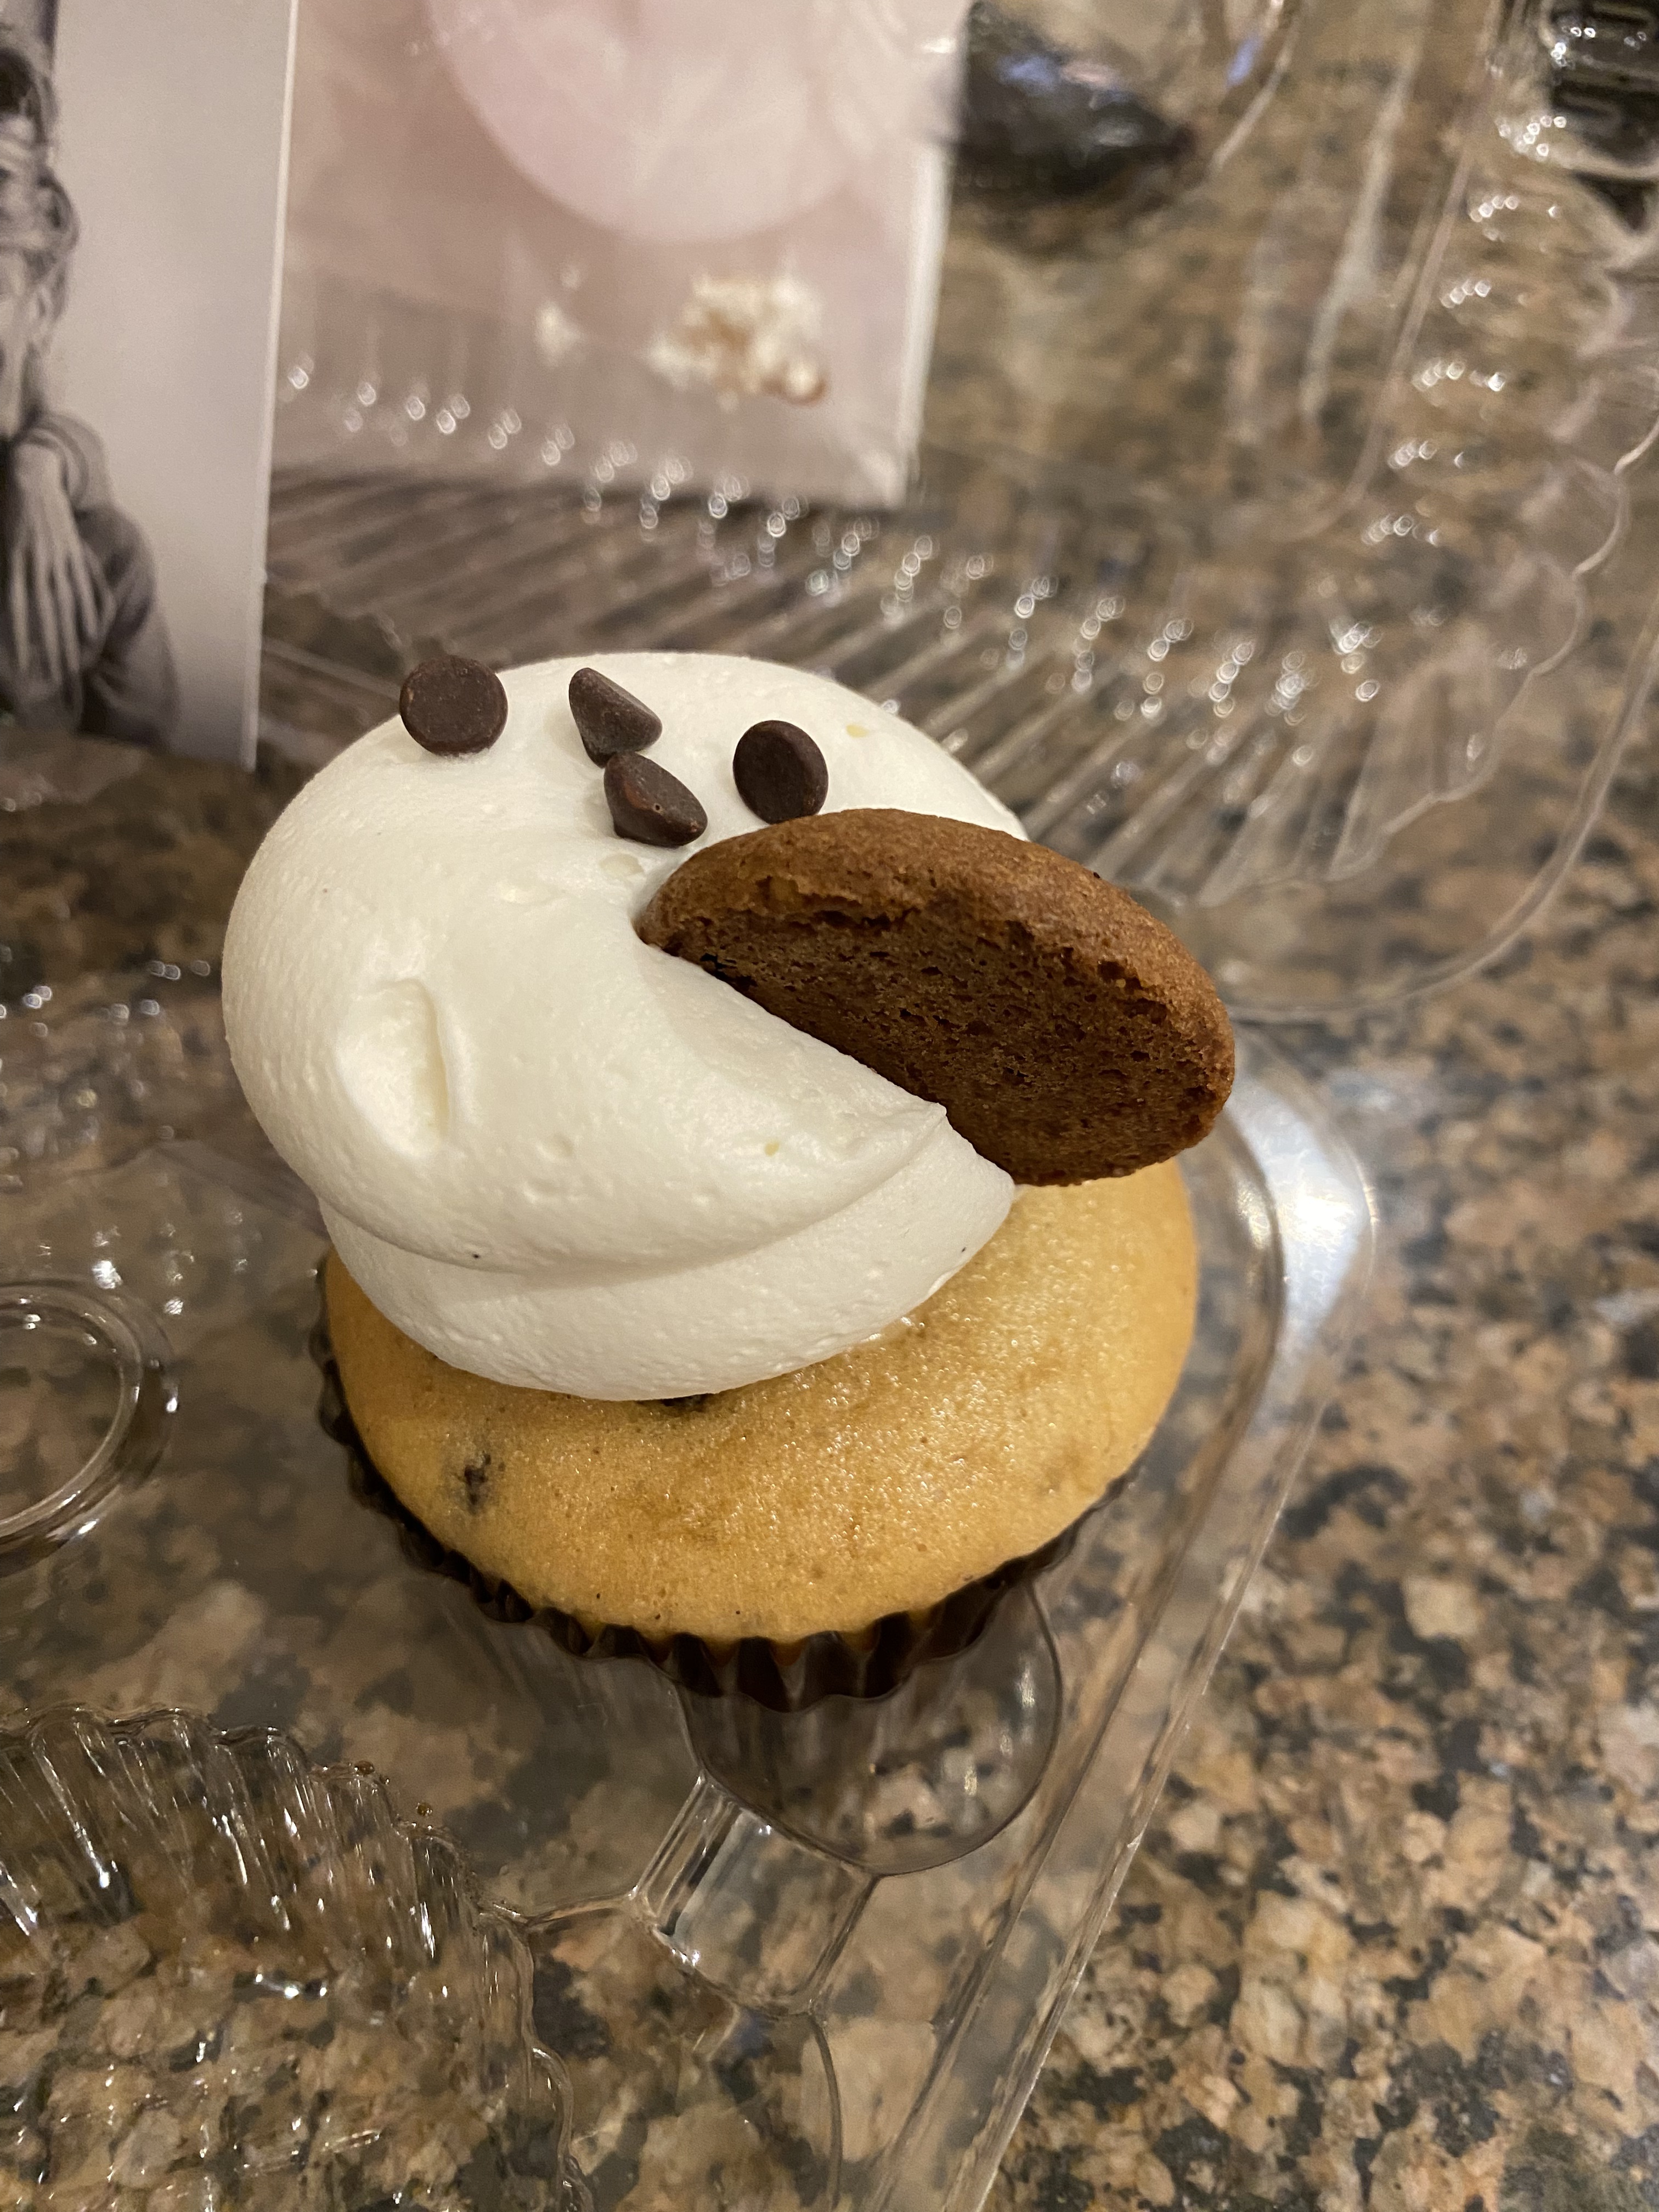 Gluten and dairy-free chocolate chip cookie dough cupcake from Kelly's Bakeshoppe - a heavenly delight!